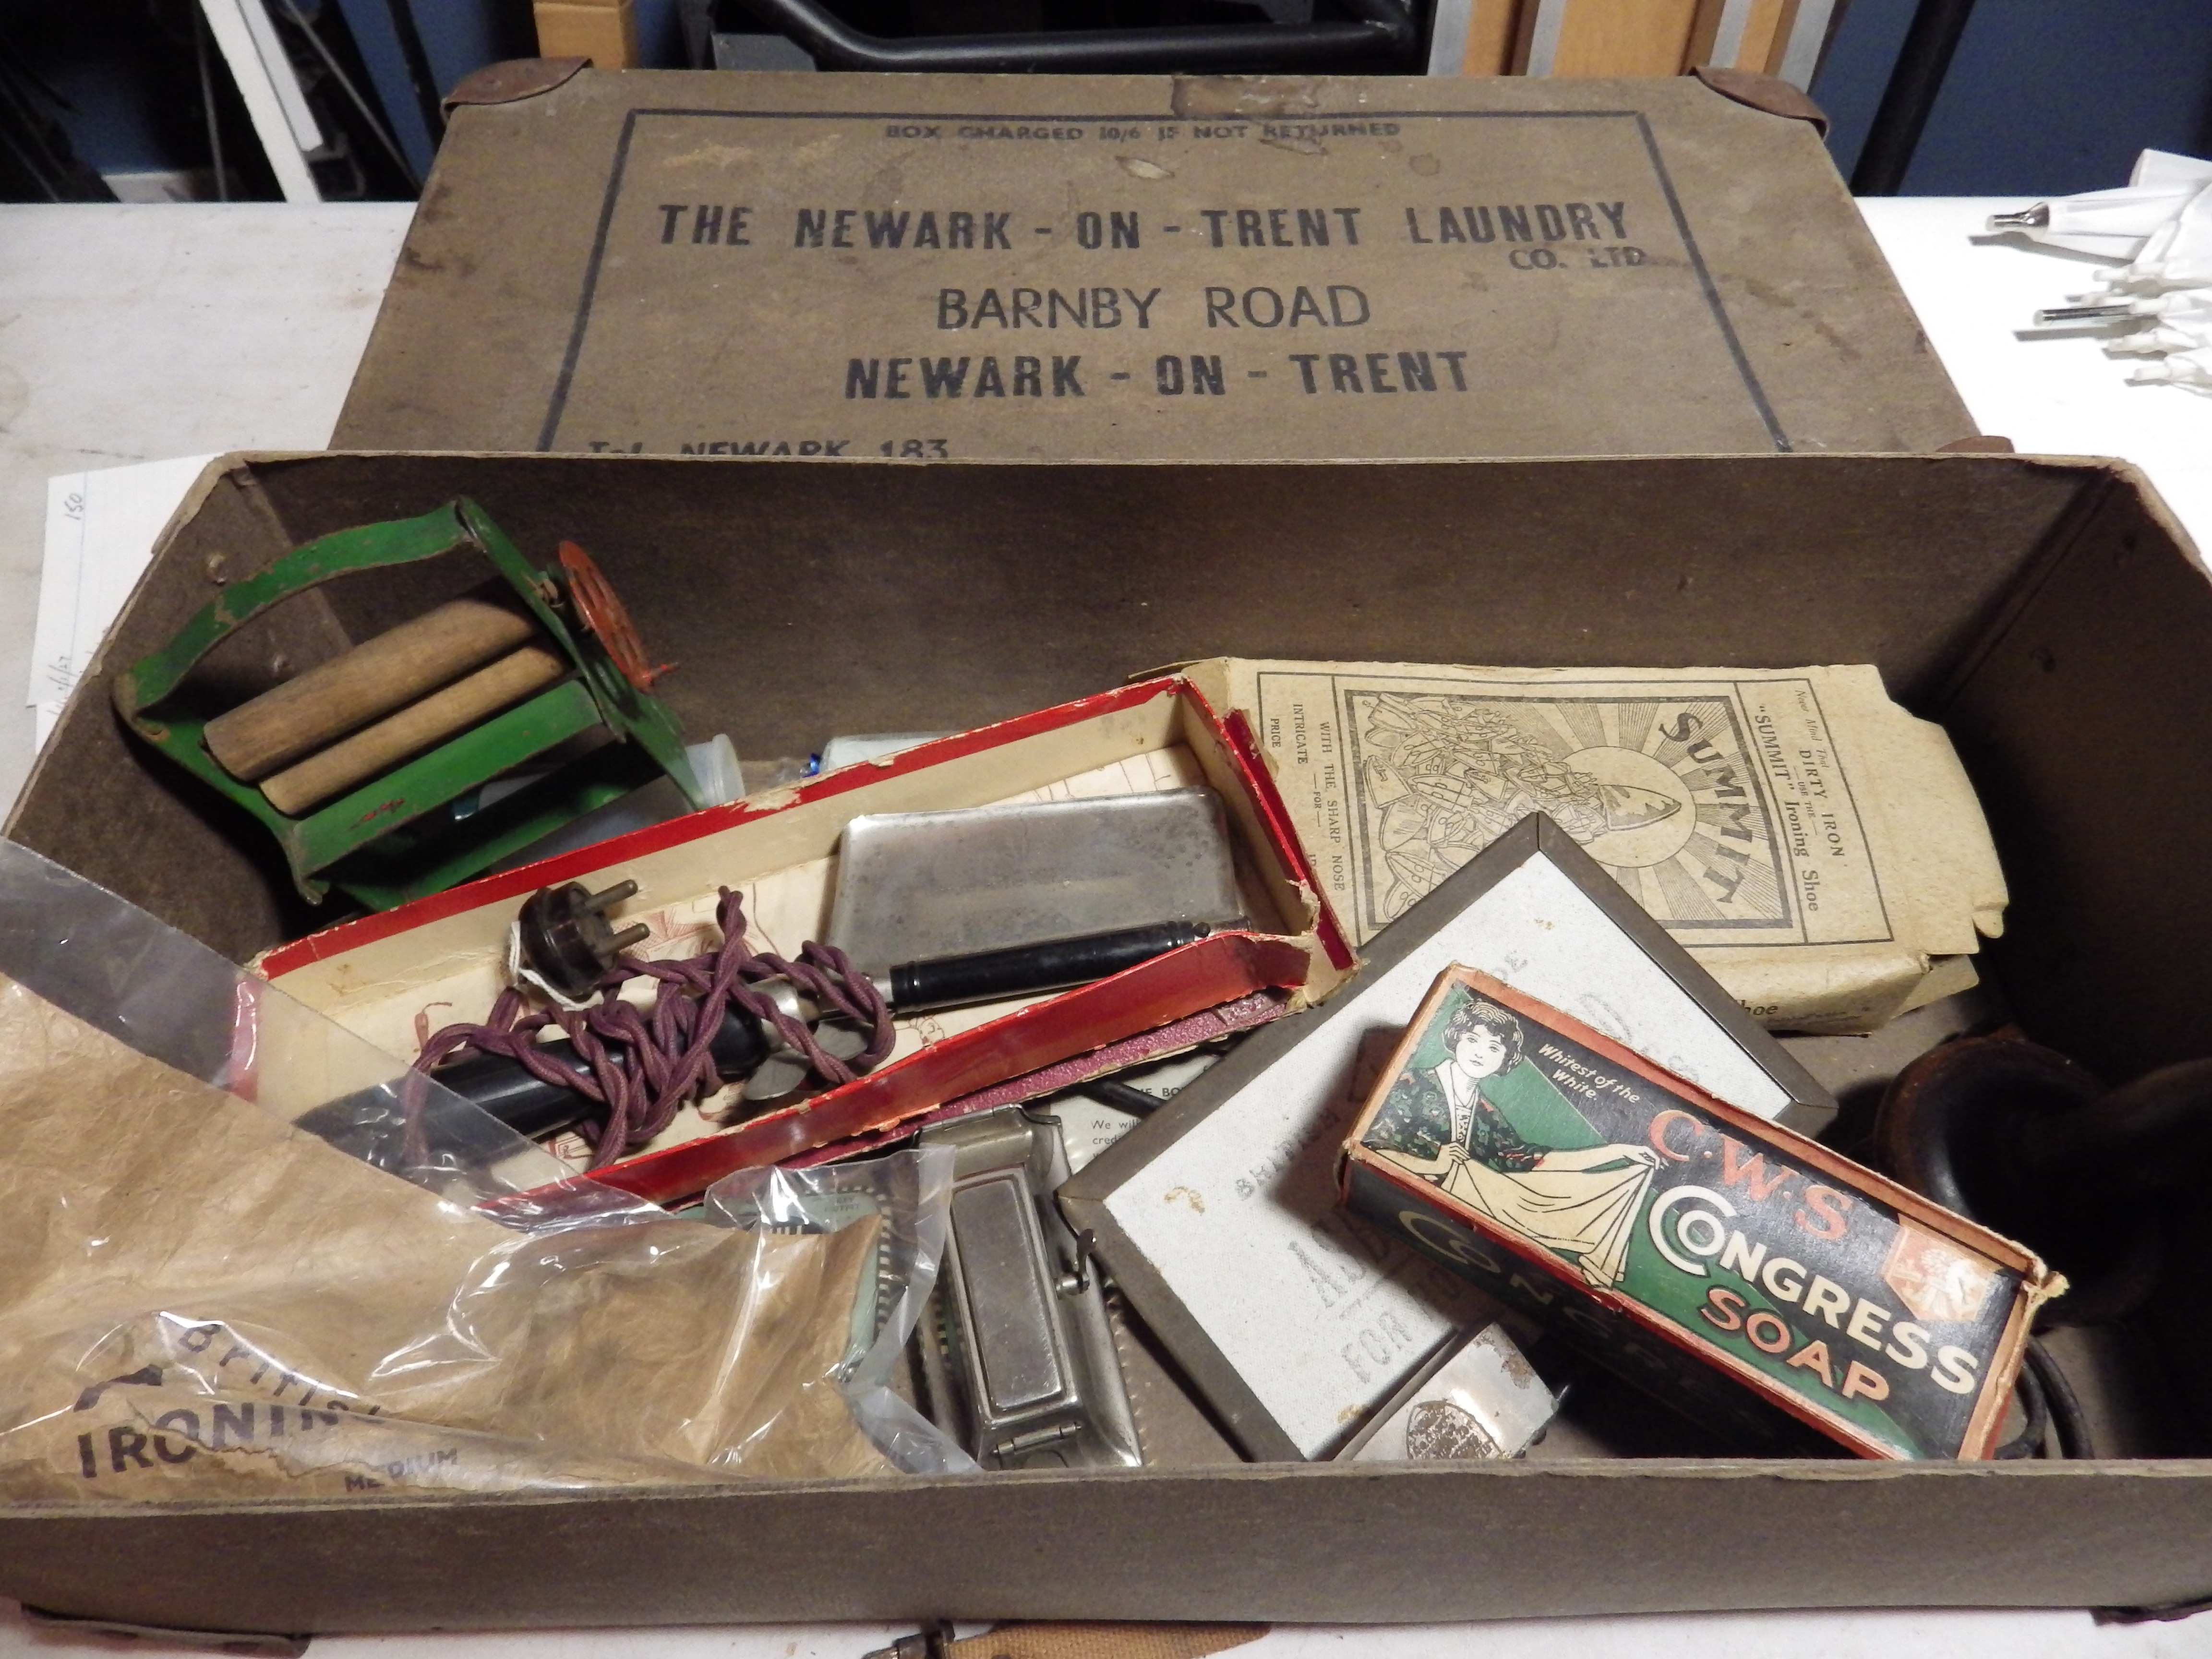 The Newark on Trent Laundry Co ltd box with contents incl Henry Heath gas hatters iron, lignum vitae